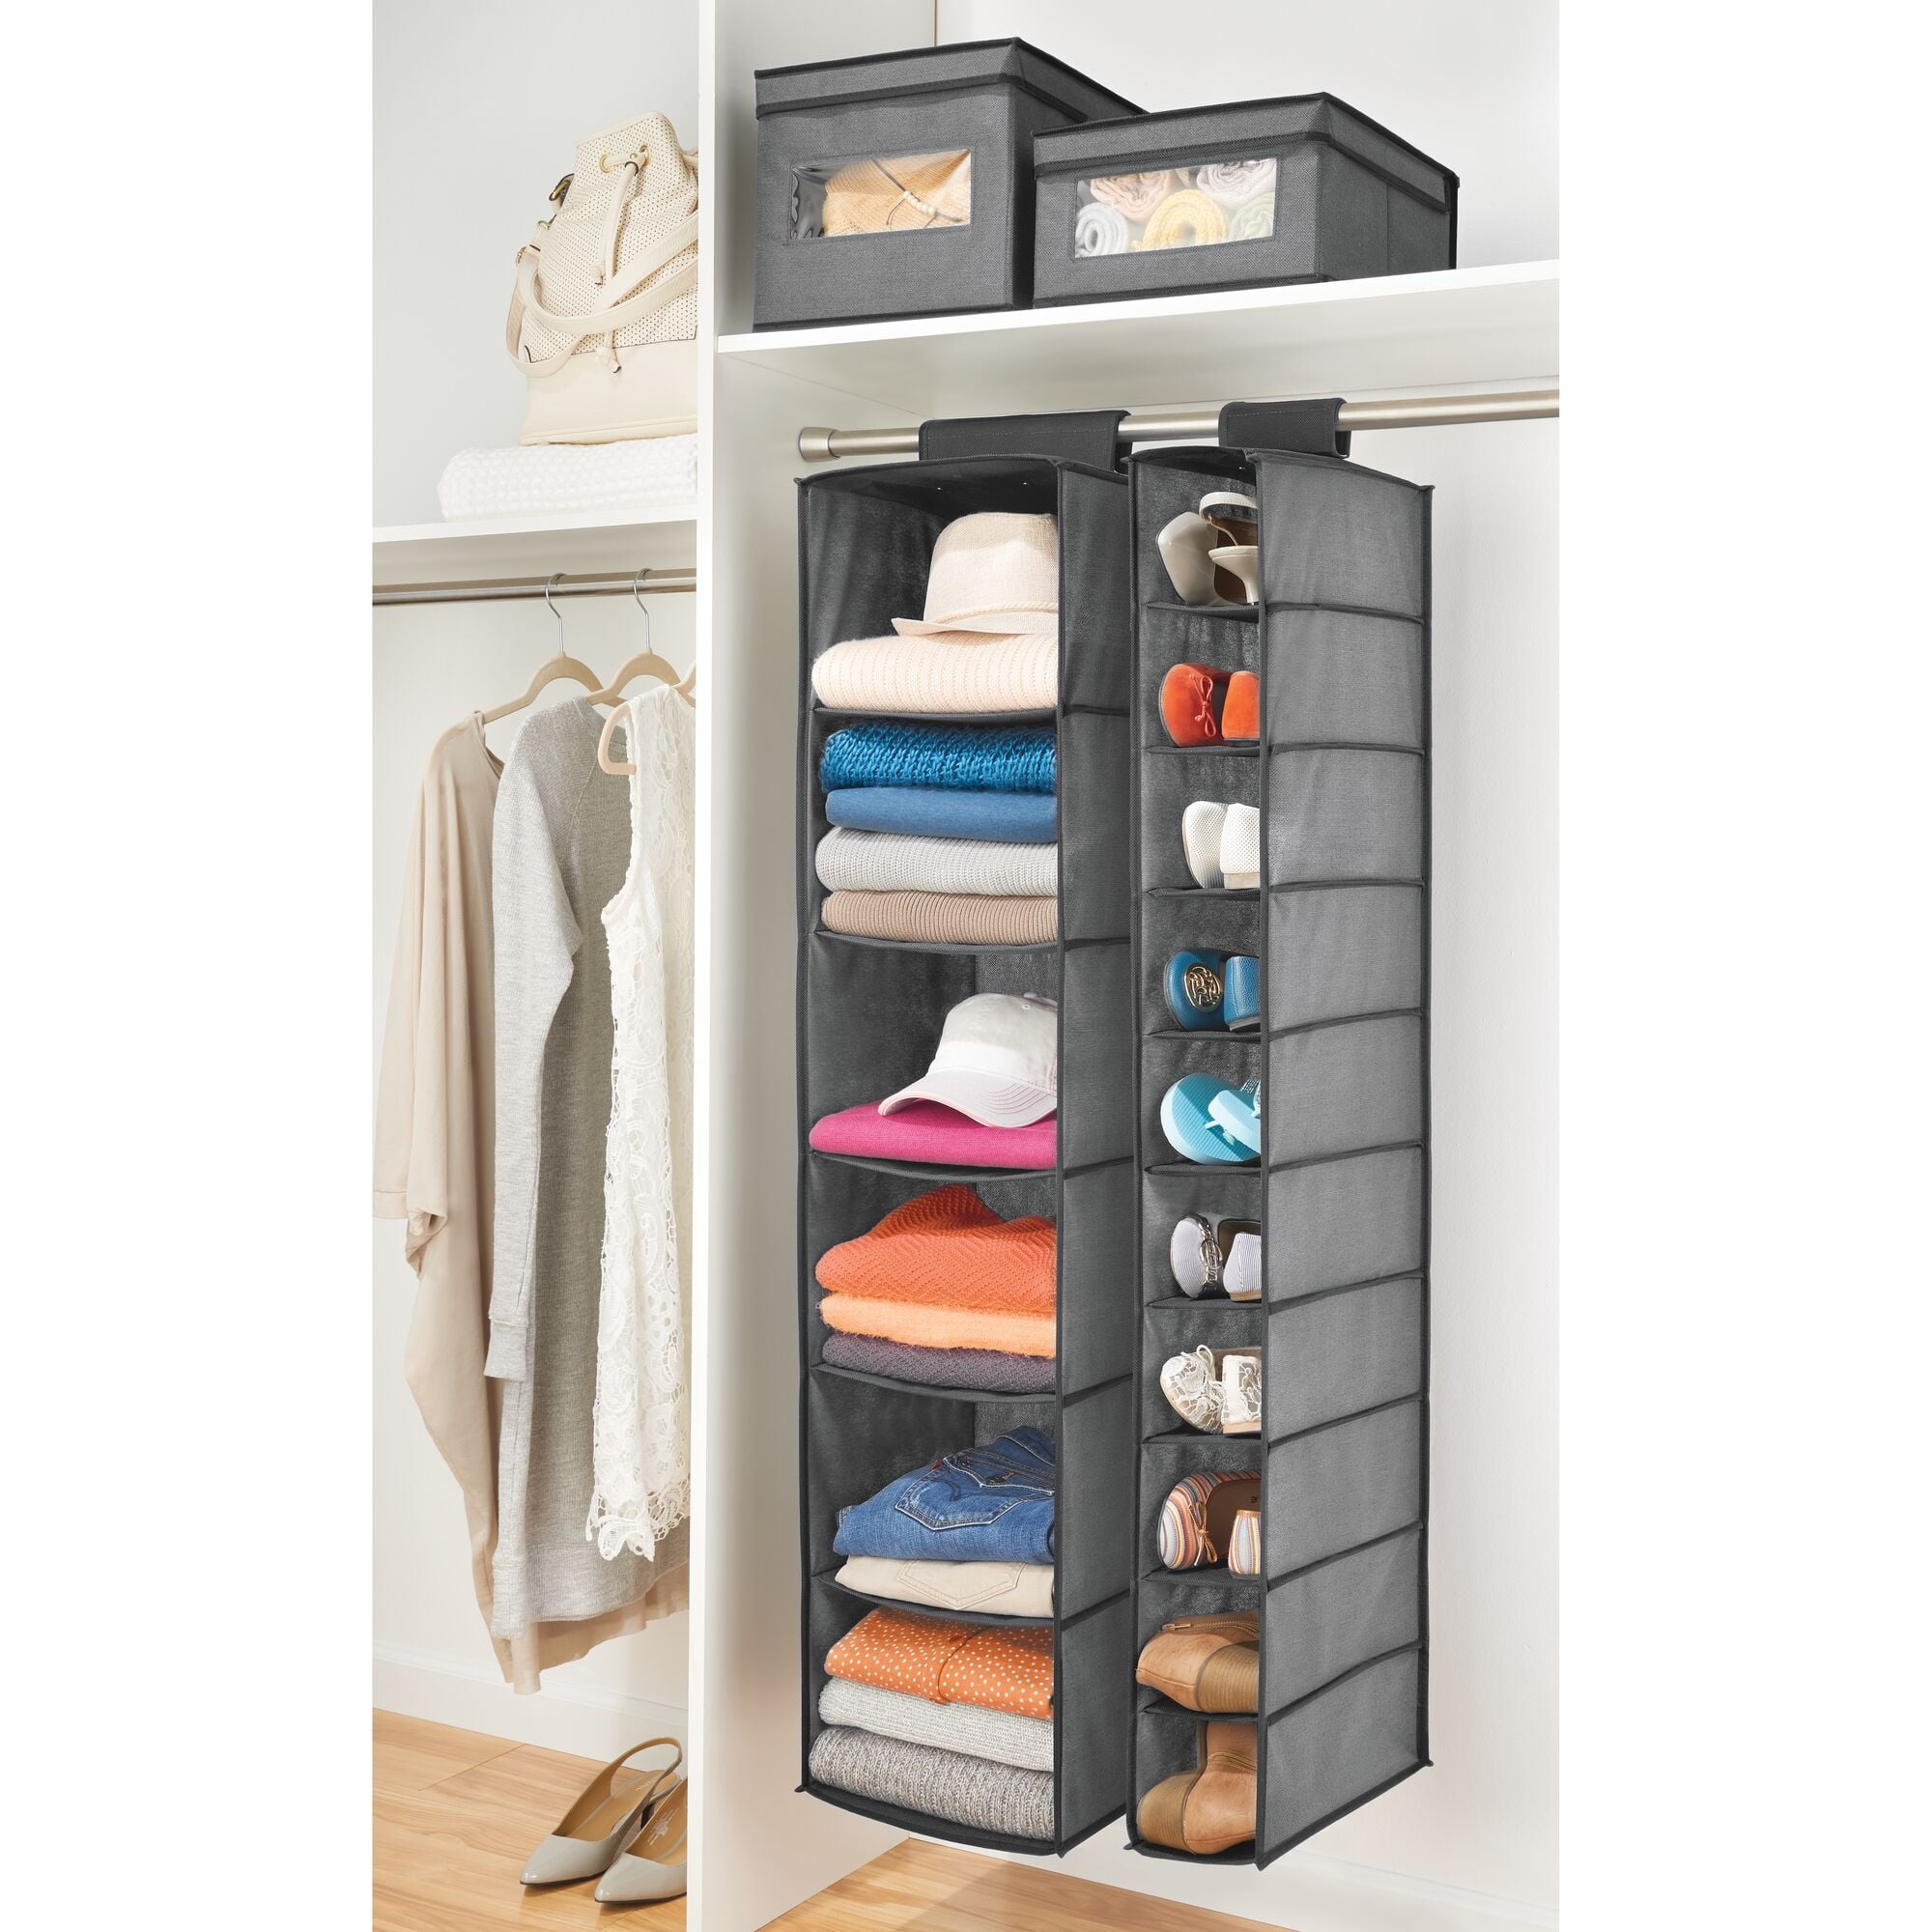 mDesign Soft Fabric Closet Organizer - Holds Shoes, Handbags, Clutches,  Accessories - 10 Shelf Over Rod Hanging Storage Unit - Textured Print - 2  Pack